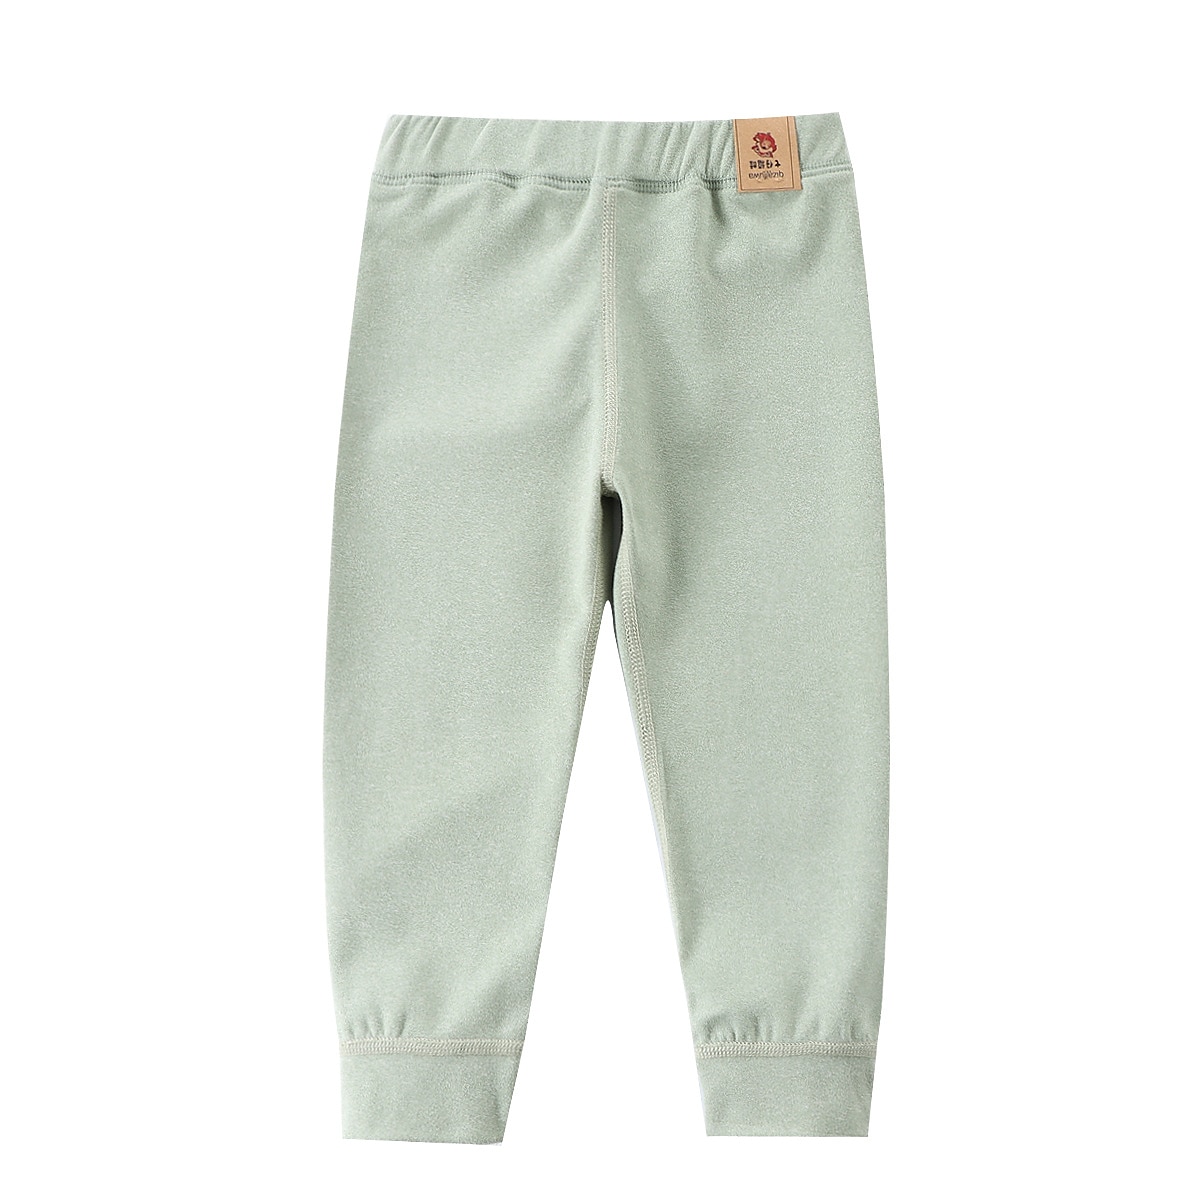 Buy Boys Pink Slim Fit Solid Trousers Online - 717028 | Allen Solly